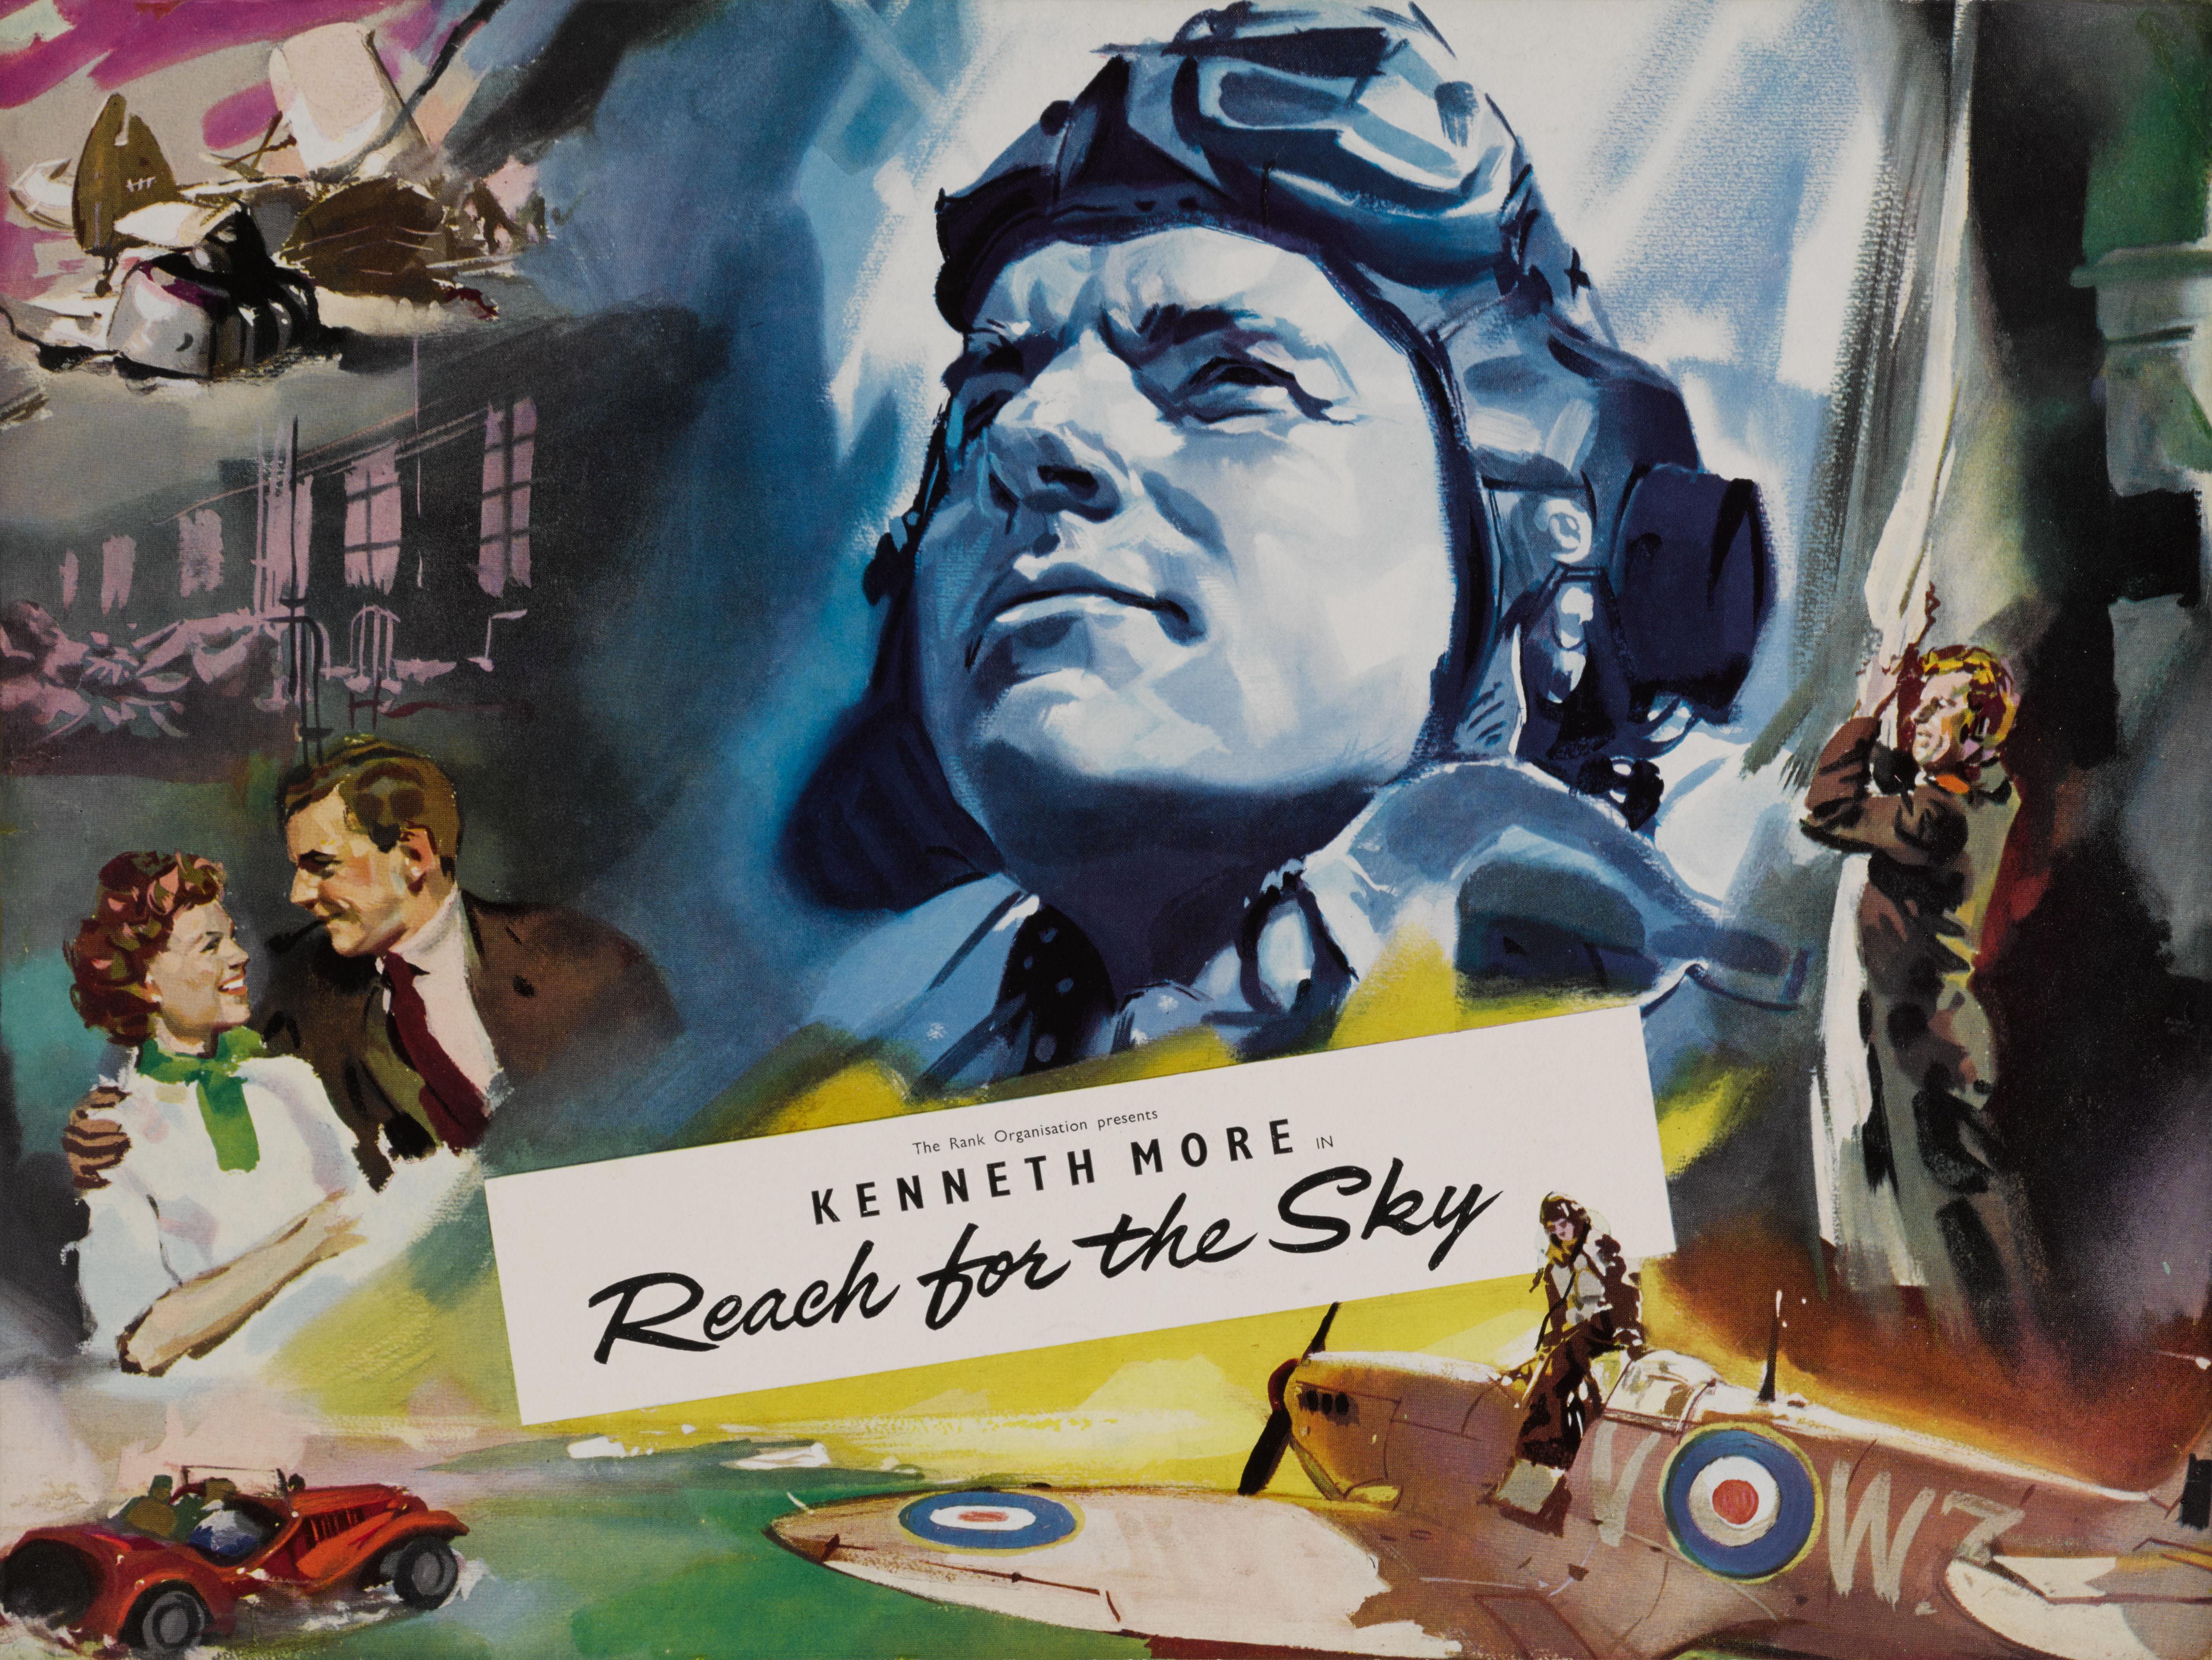 Original British color synopses for the film Reach for the Sky, 1956
This film was a Biopic of RAF Group Captain Douglas Bader who, after having lost both legs in a aerobatics crash he went on to fly a British fighter plane during WW2. He was He